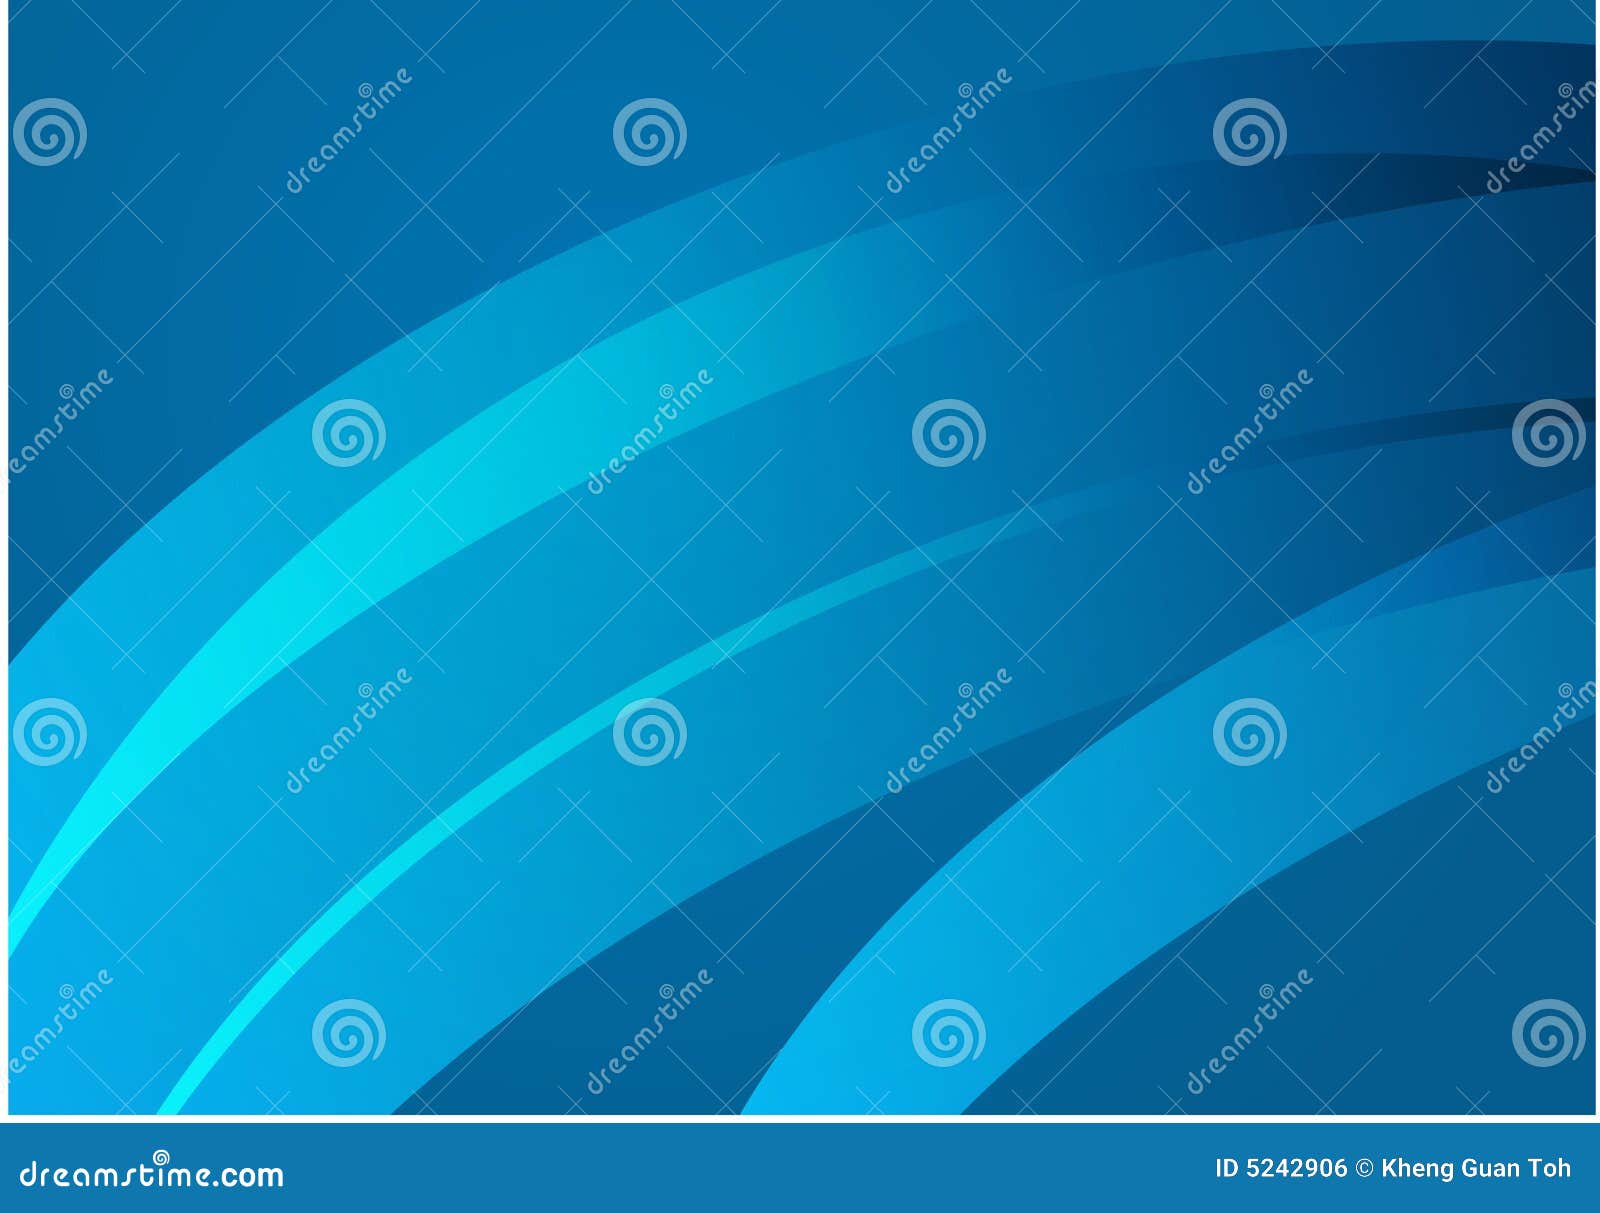 Smooth arcs stock vector. Illustration of vector, curves - 5